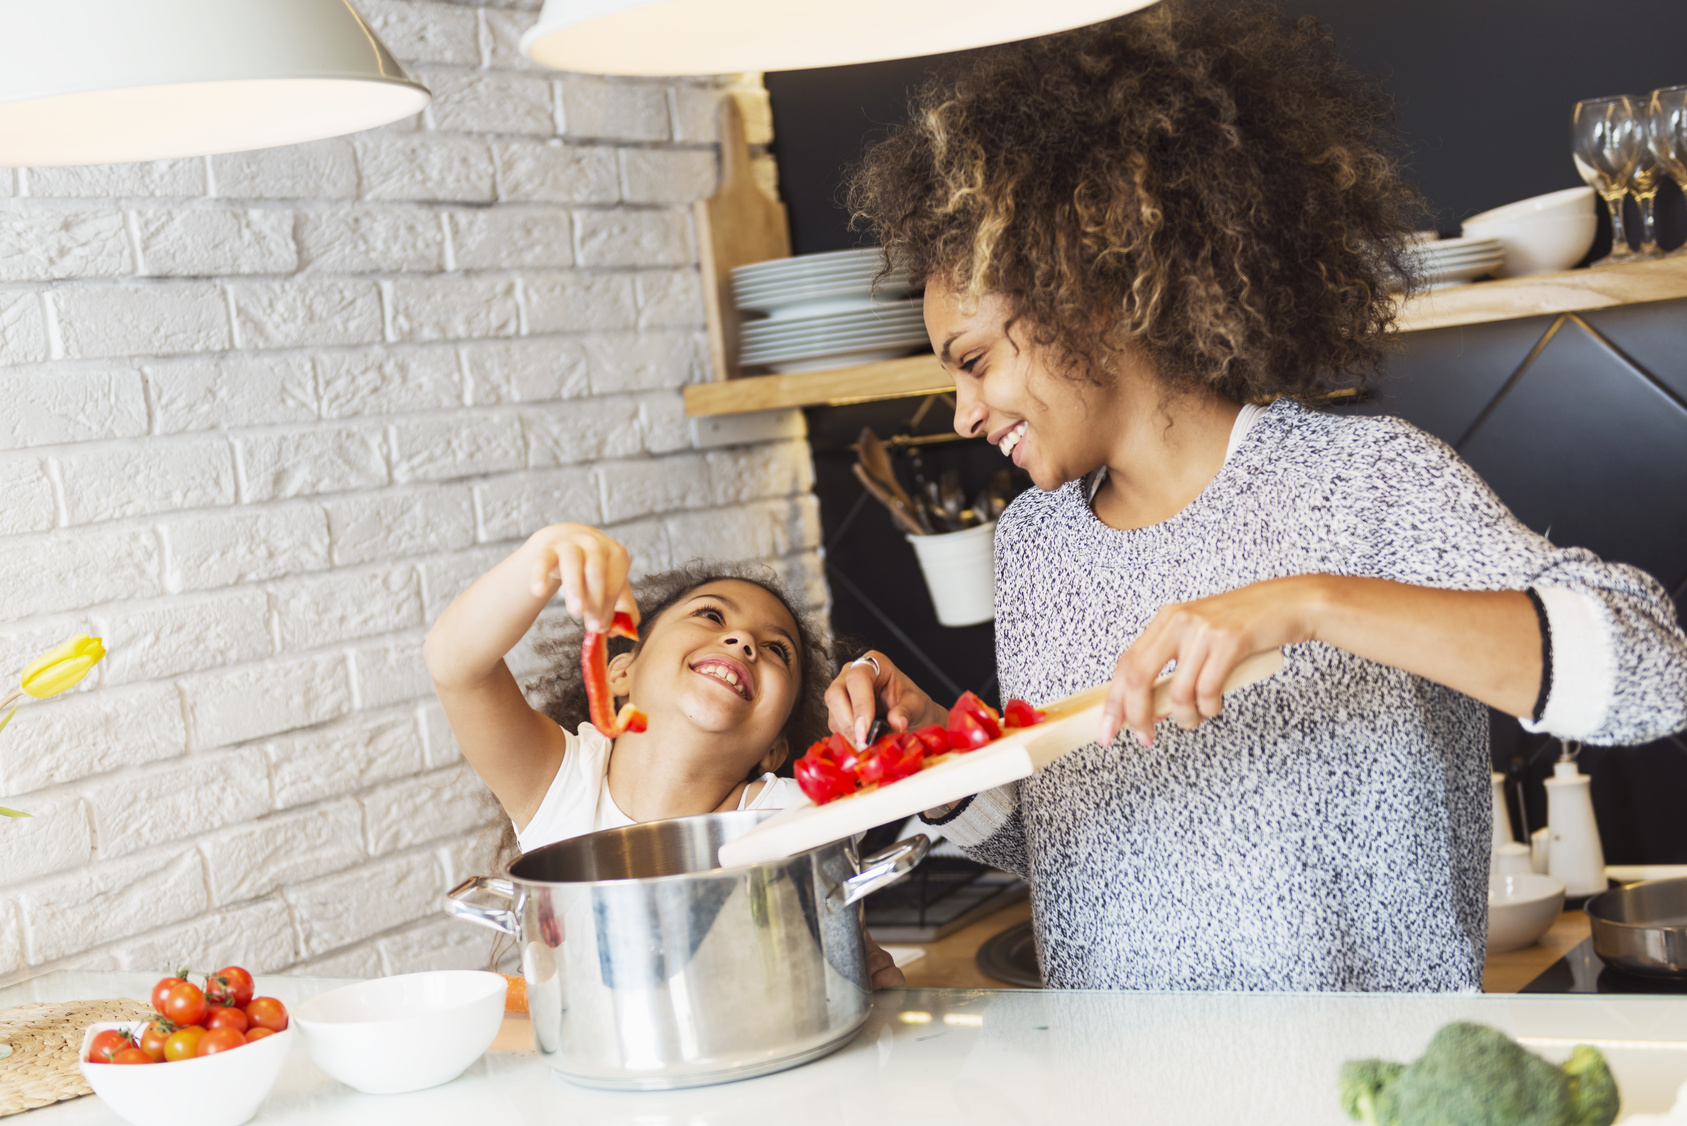 Mother and daugher connecting in a meaningful way while cooking in the kitchen